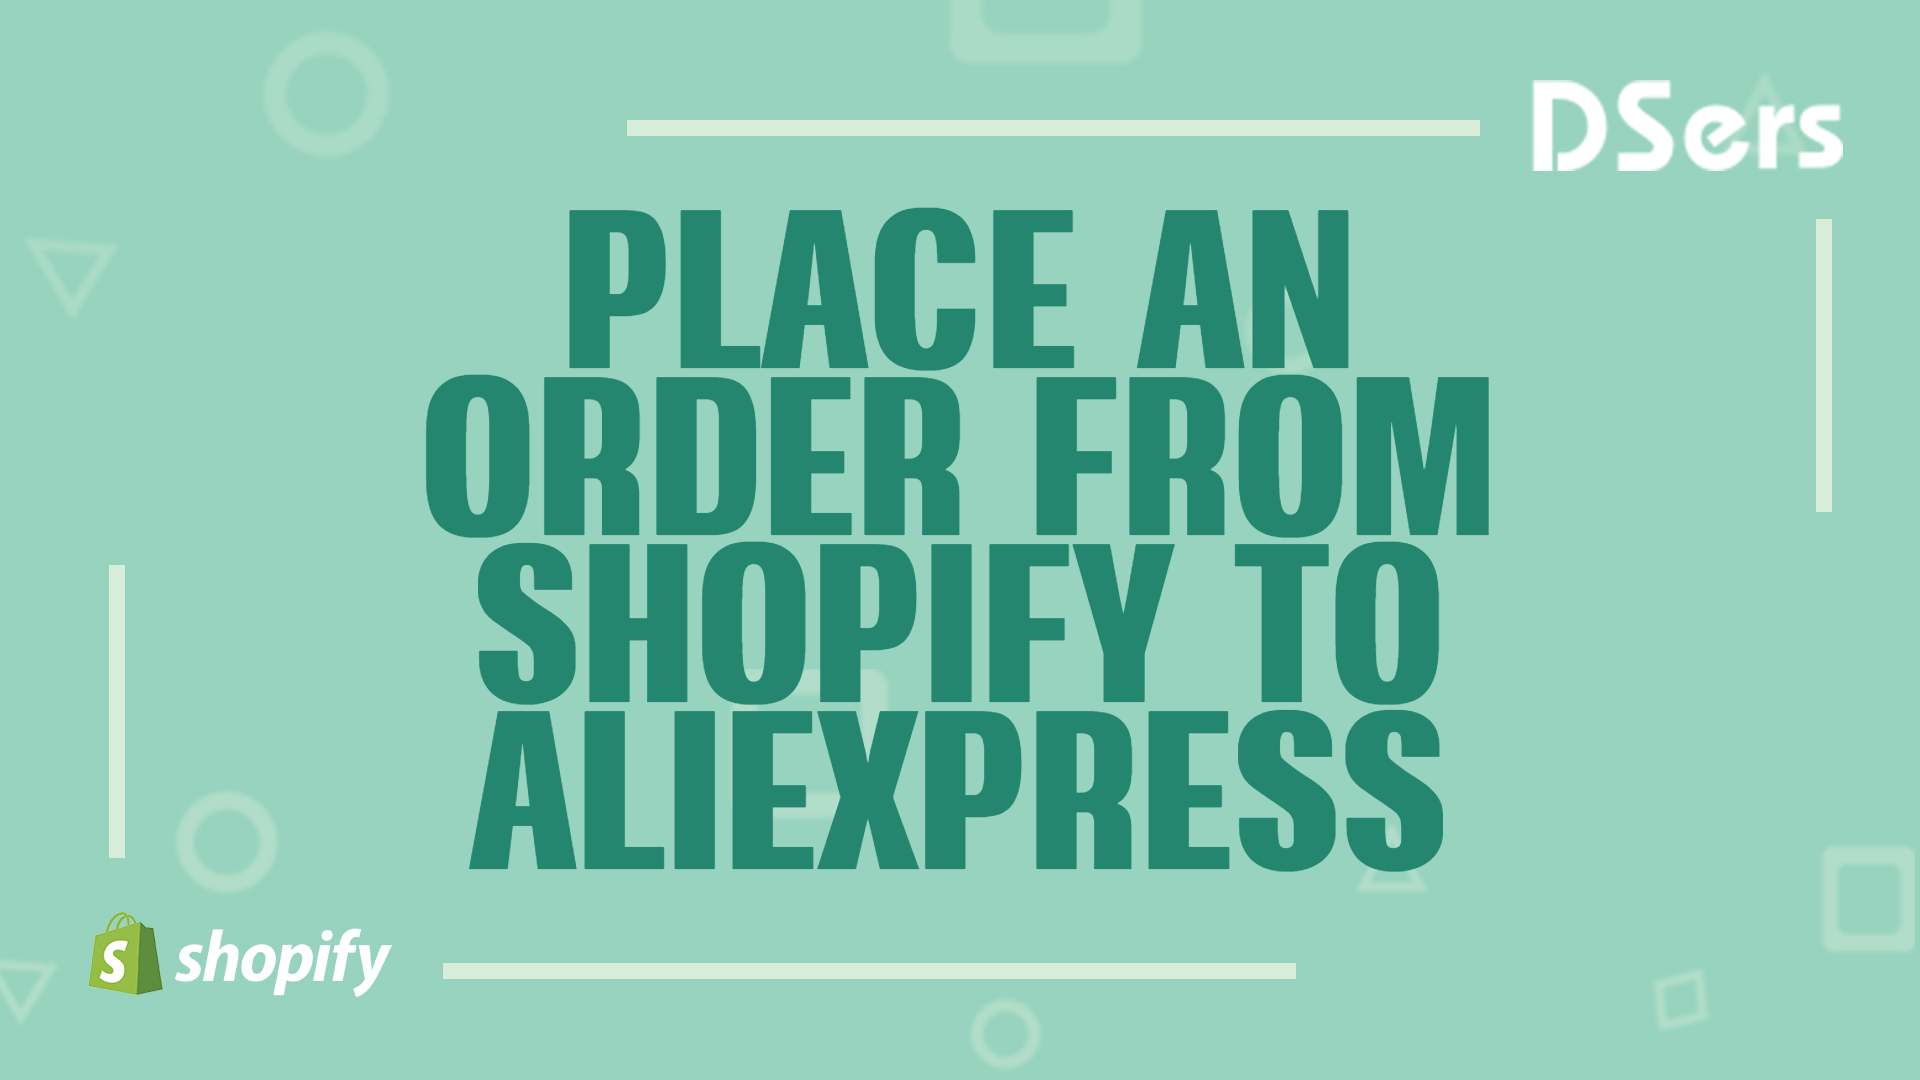 Place an order from Shopify to AliExpress